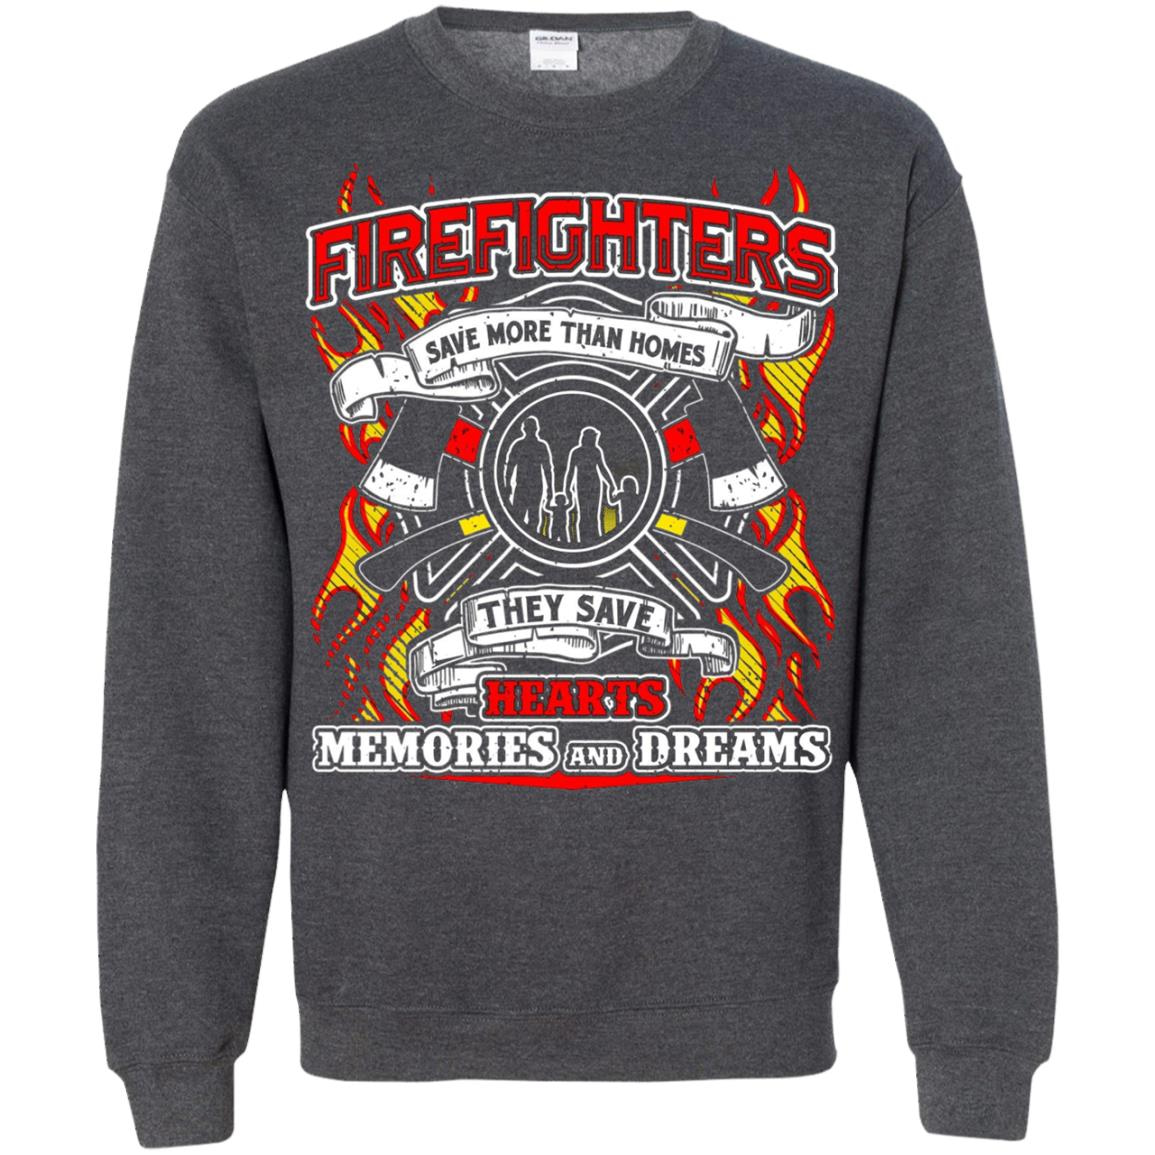 Inktee Store - Firefighters Save More Than Homes They Save Dreams Sweatshirt Image